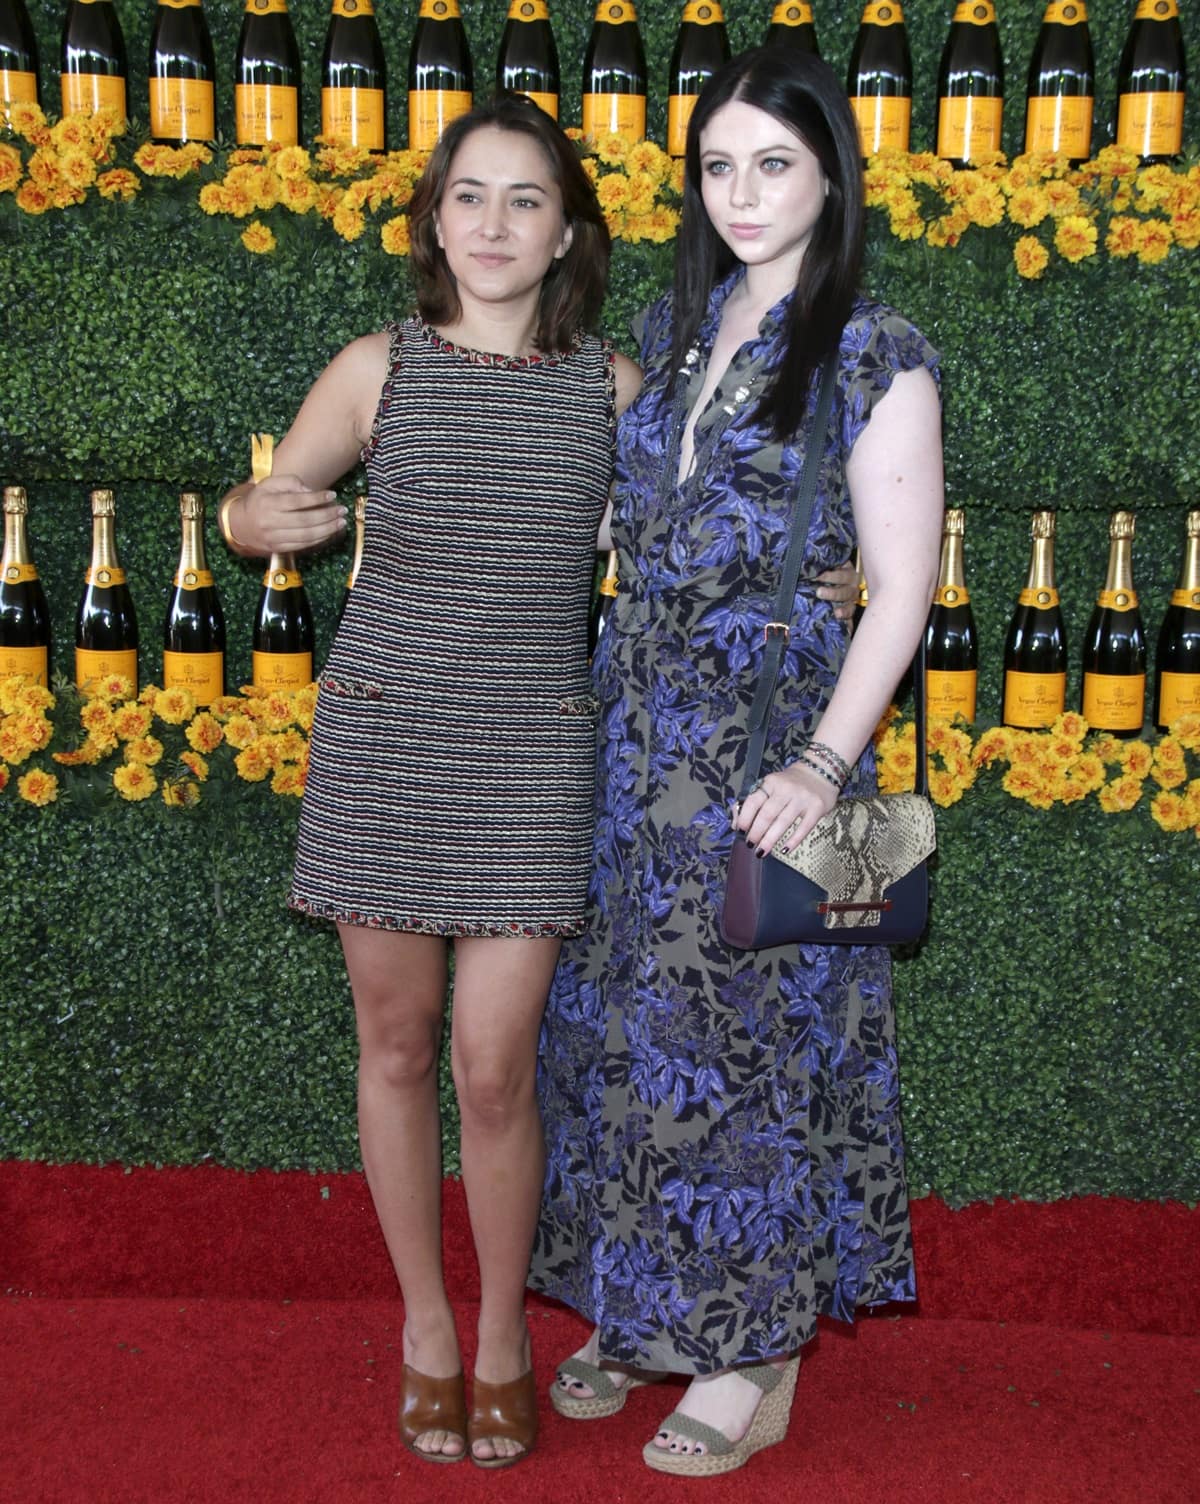 Michelle Trachtenberg, standing at 5ft 6, and Zelda Williams, at 5ft 3, attended the Sixth-Annual Veuve Clicquot Polo Classic at Will Rogers State Historic Park in Pacific Palisades, California, on October 17, 2015